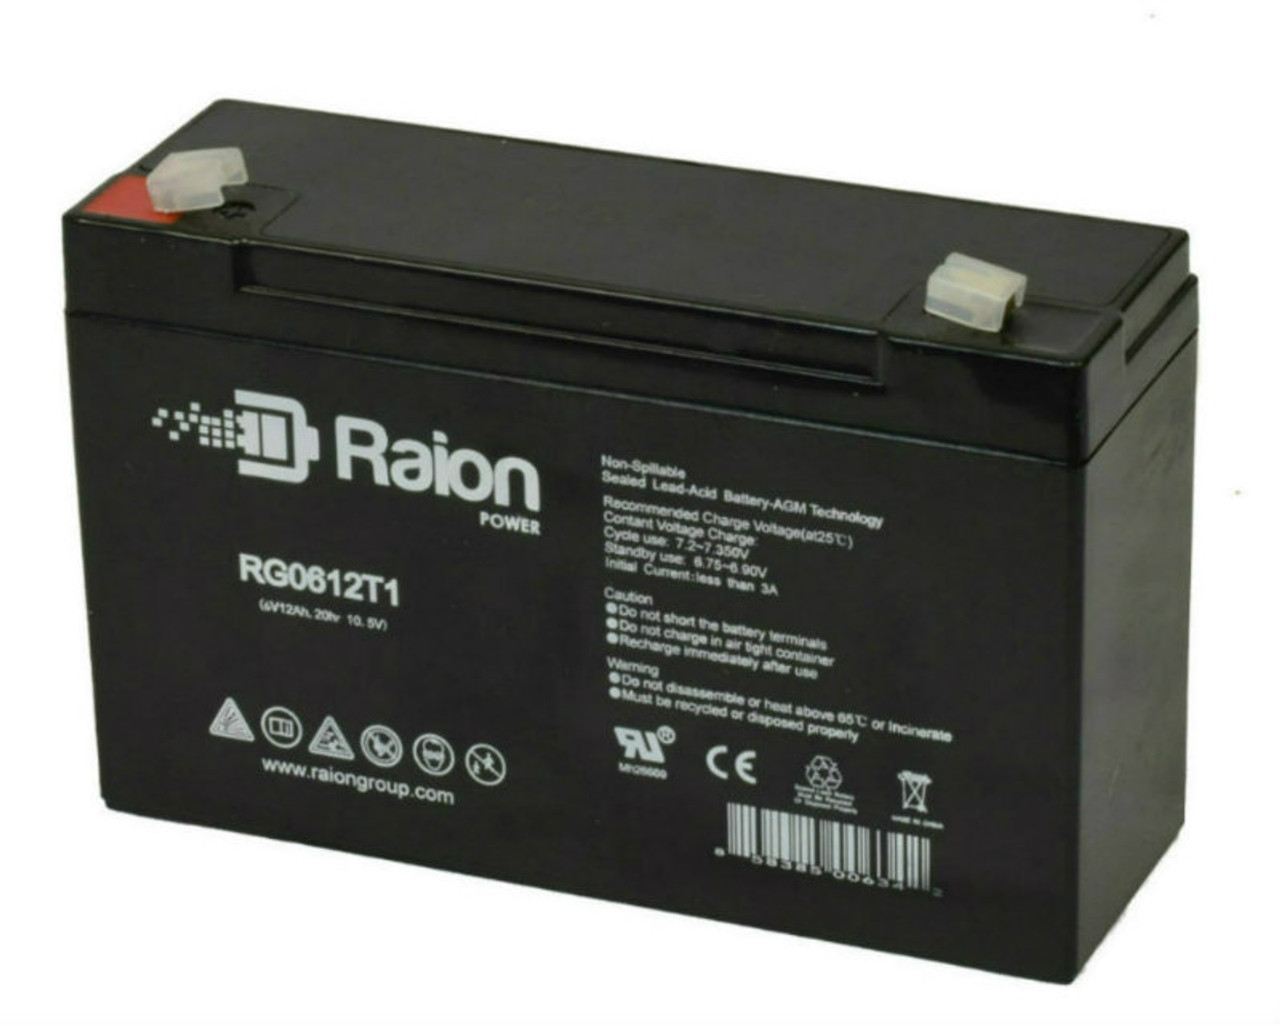 Raion Power RG06120T1 Replacement Battery for Tempest TR12-6A